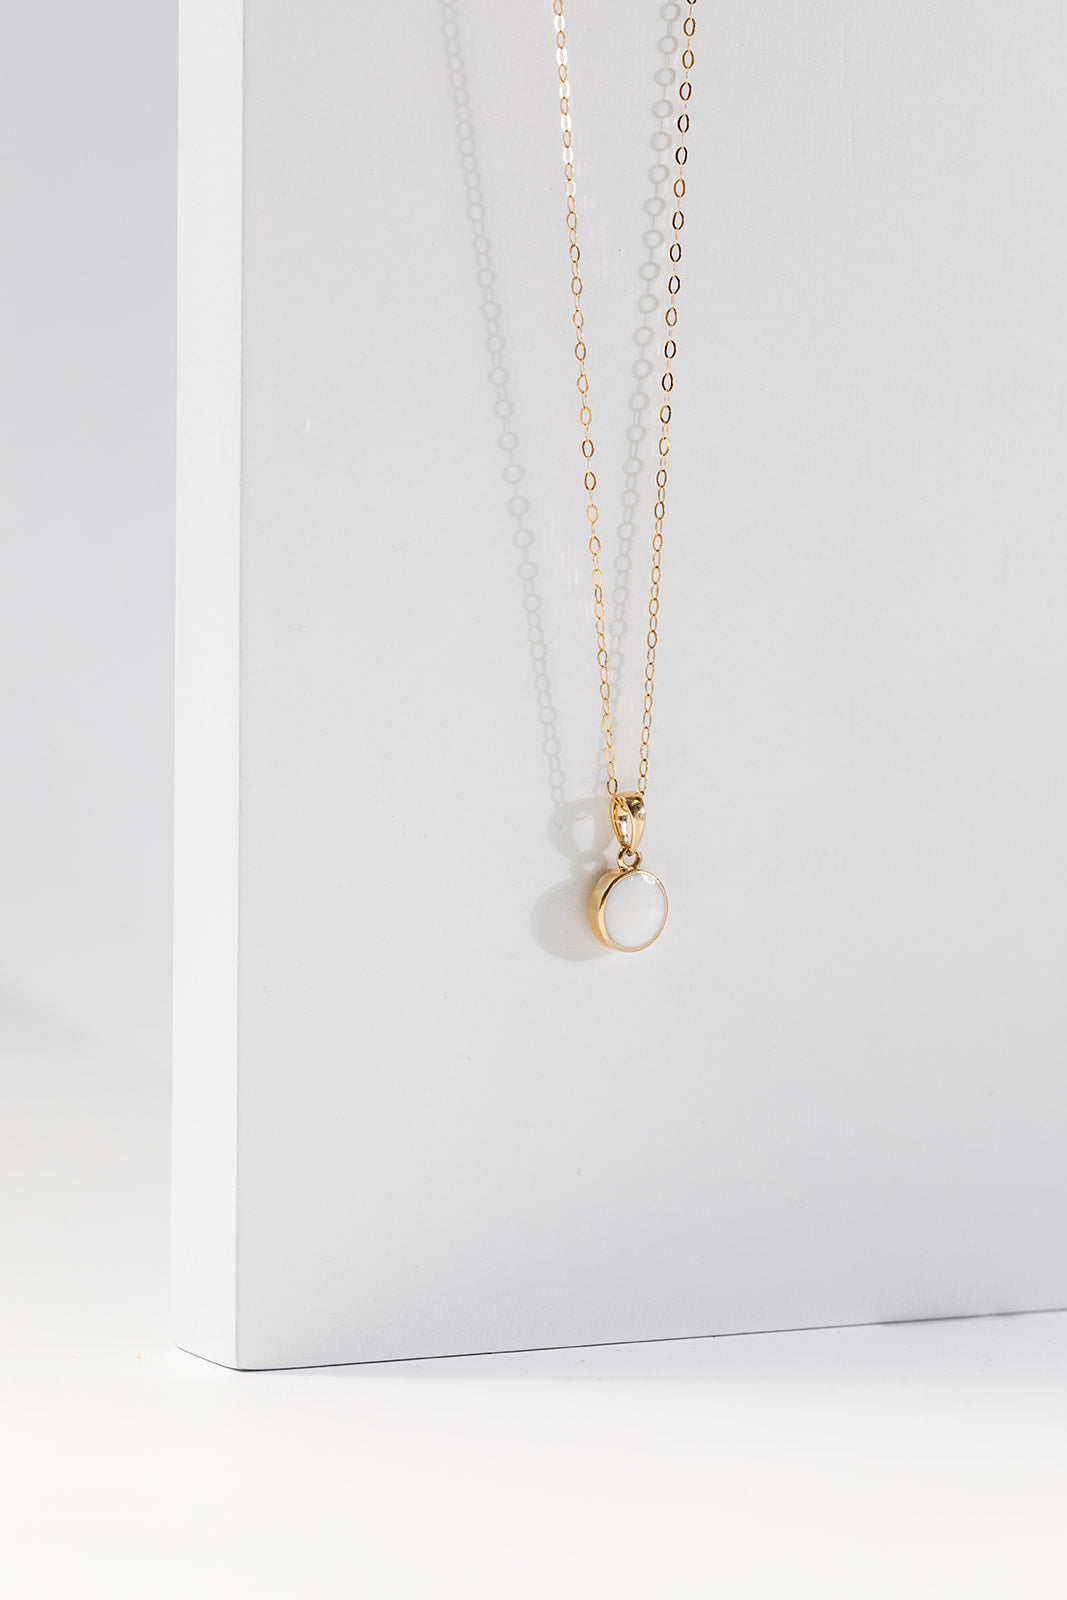 Breastmilk Round Gold Pendant Necklace